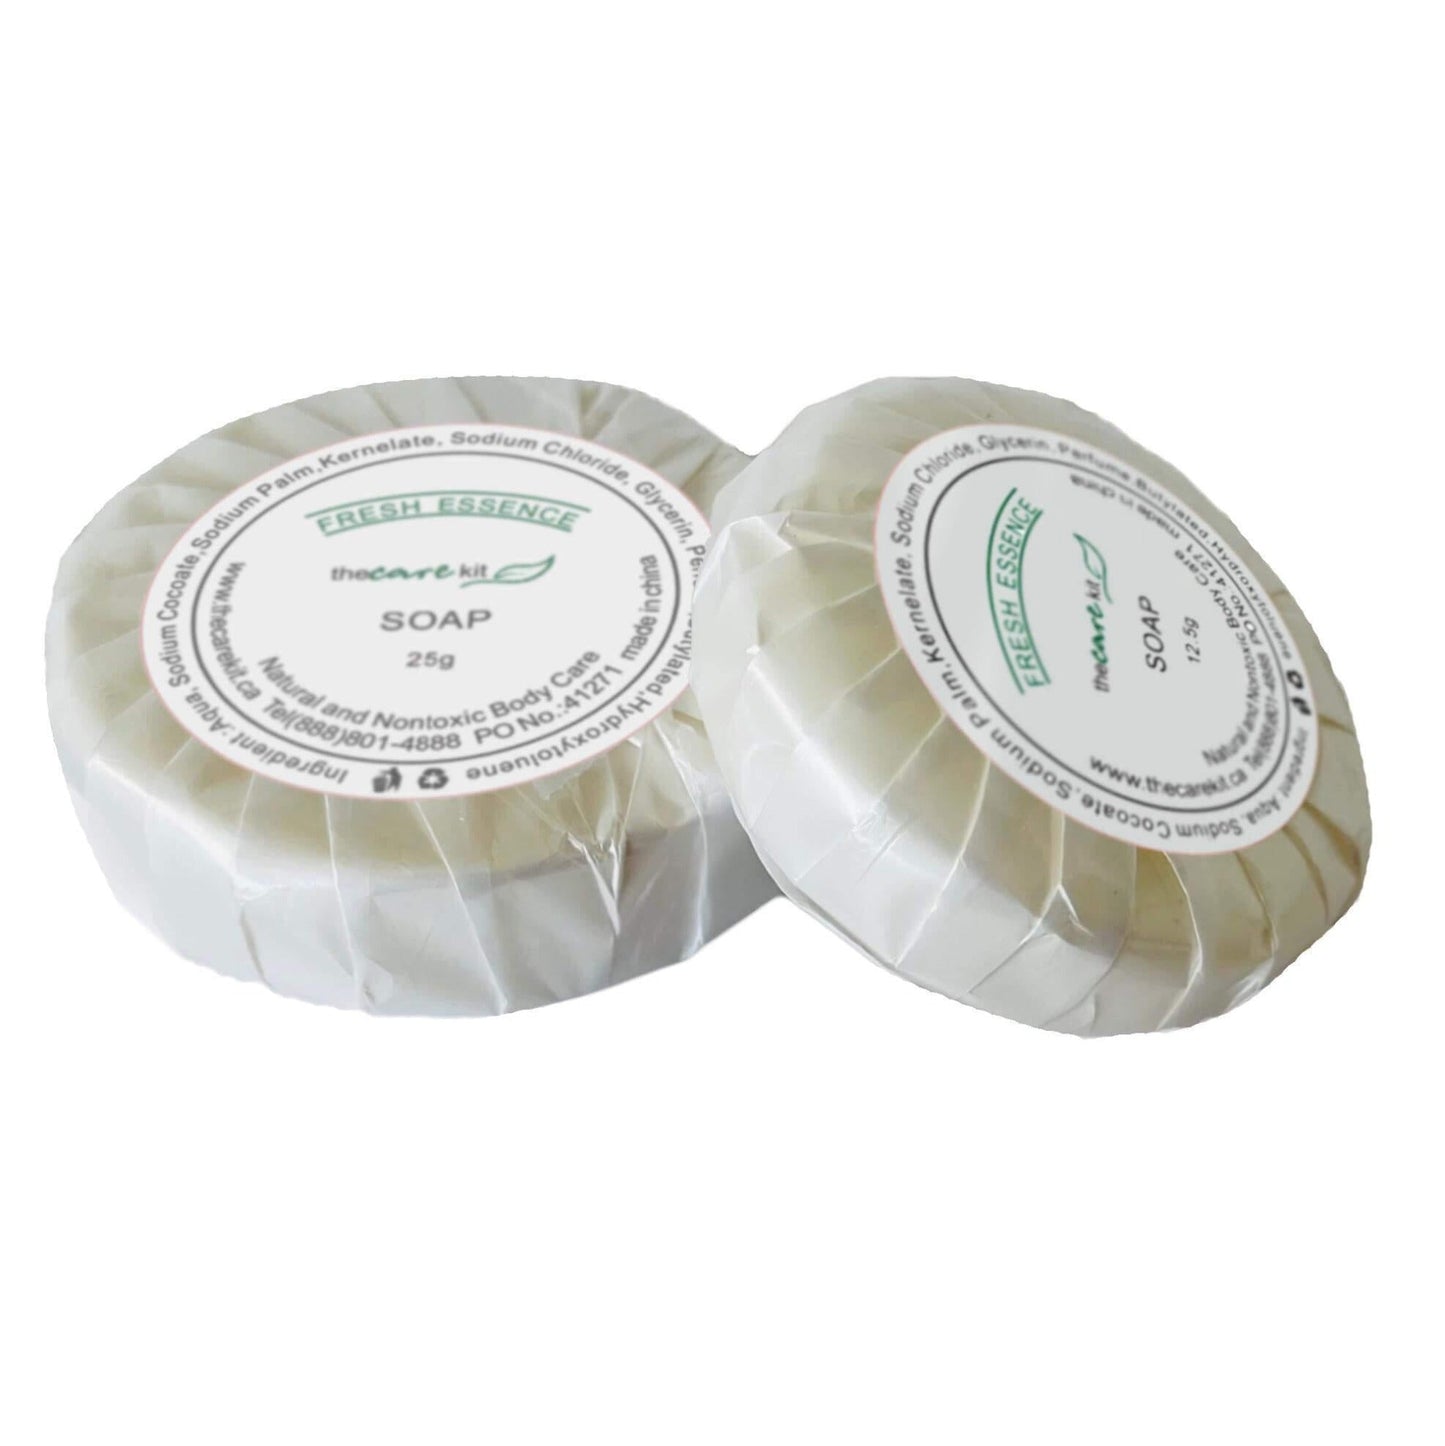 Treat Your Skin: Cocoa Butter Elegance - The Care Kit Fresh-Essence Face & Body Soap 12.5g by CHS